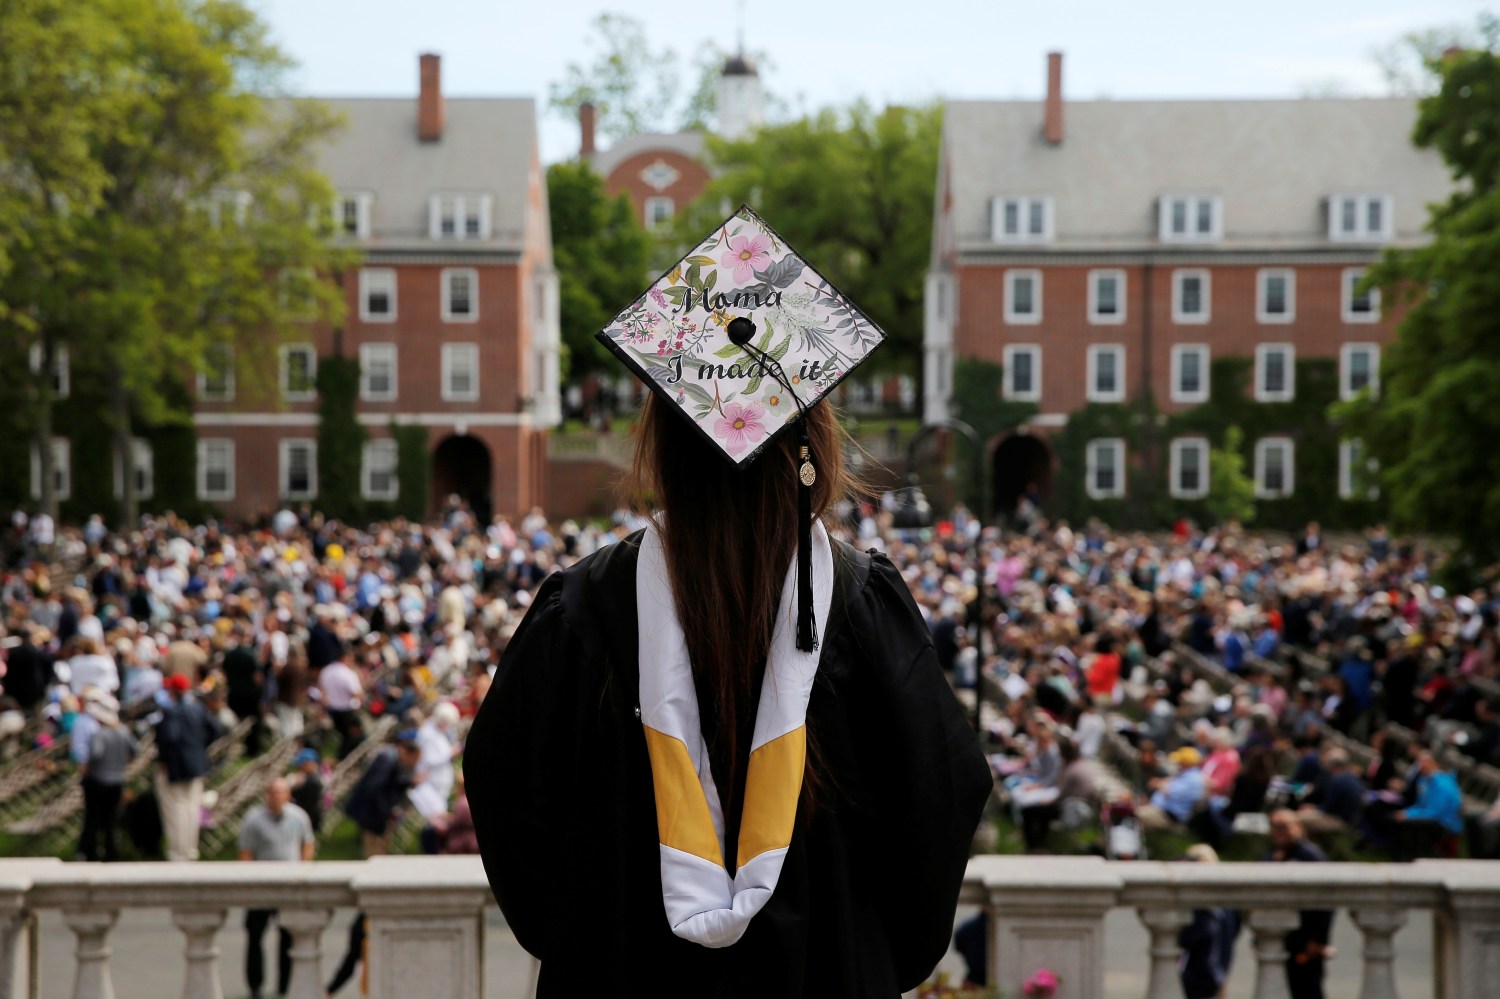 College graduate with her cap at a commencement ceremony.